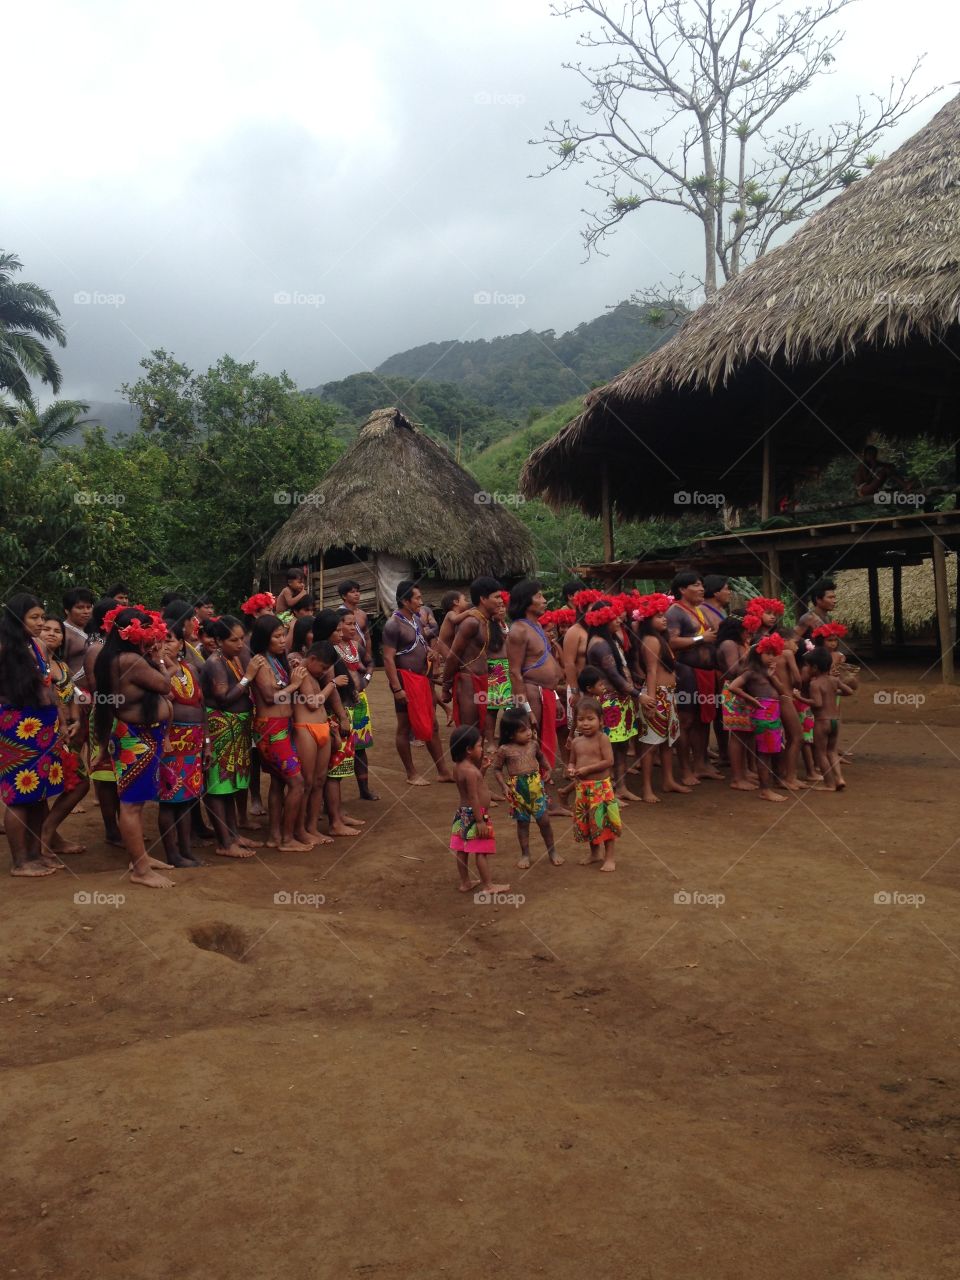 Beautiful outfits worn by native villagers in Panama 